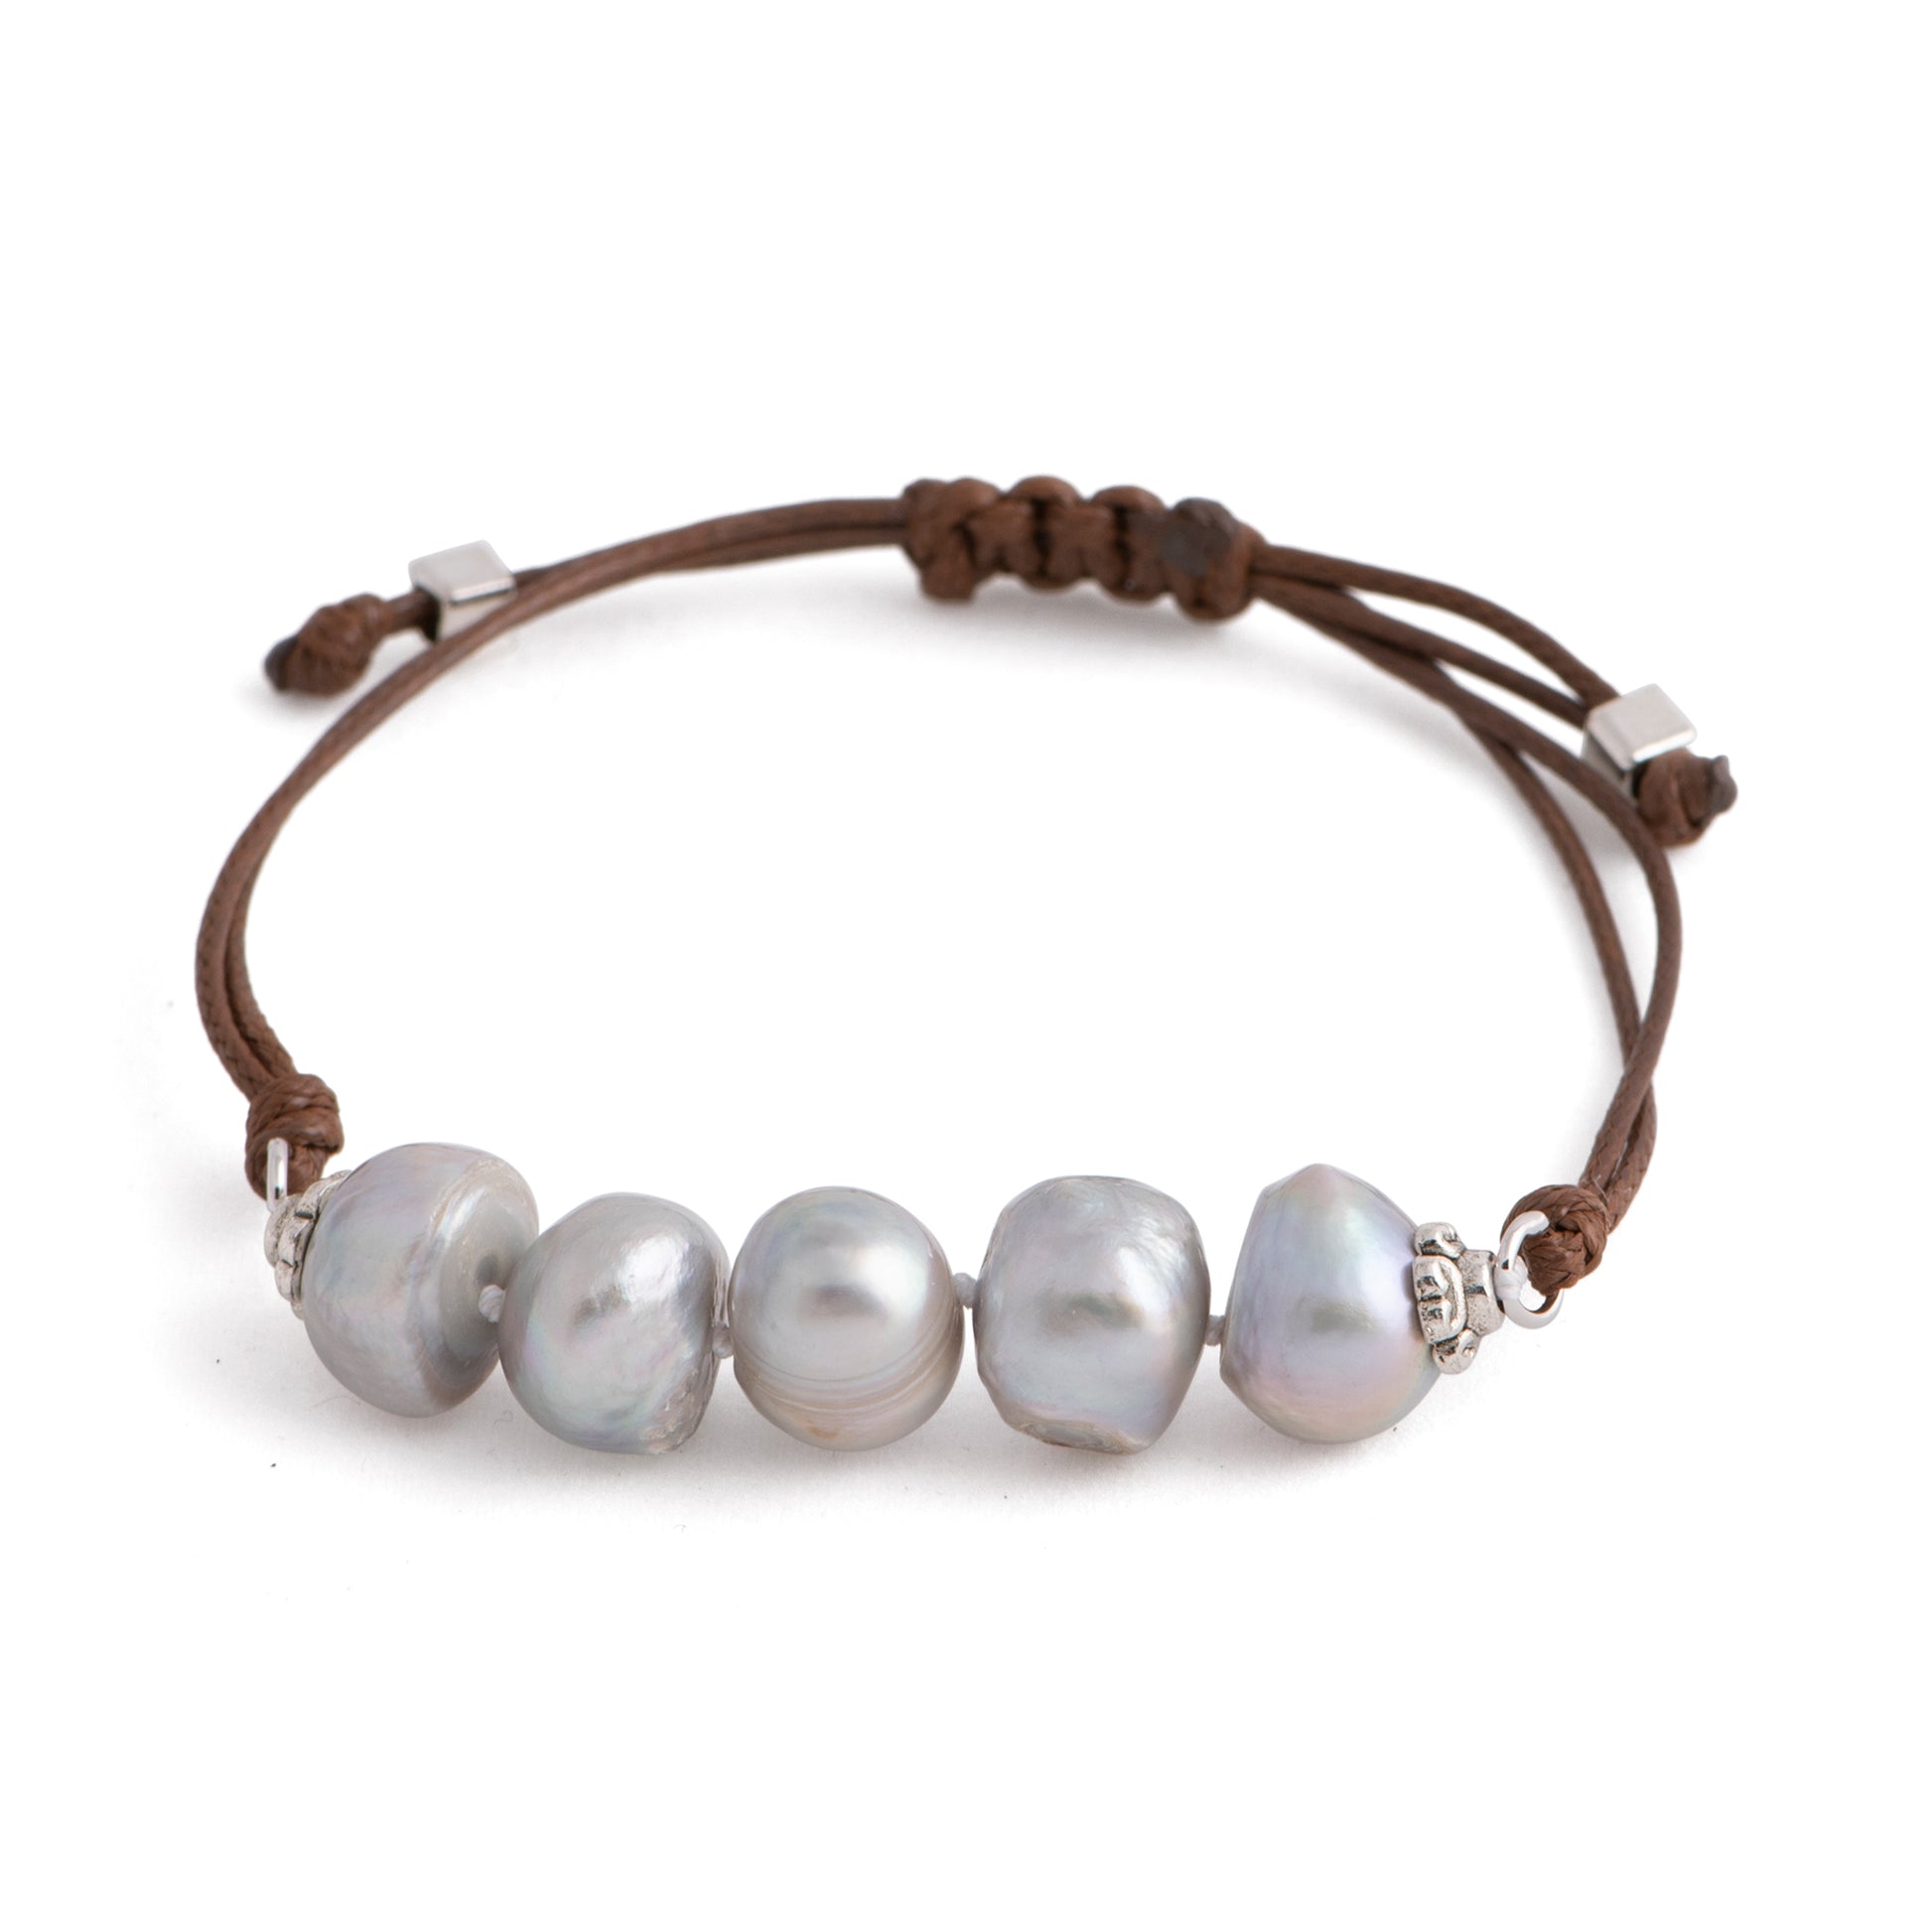 Breathless Wines - Products - Slate Piano Wire Bracelet with Pearls